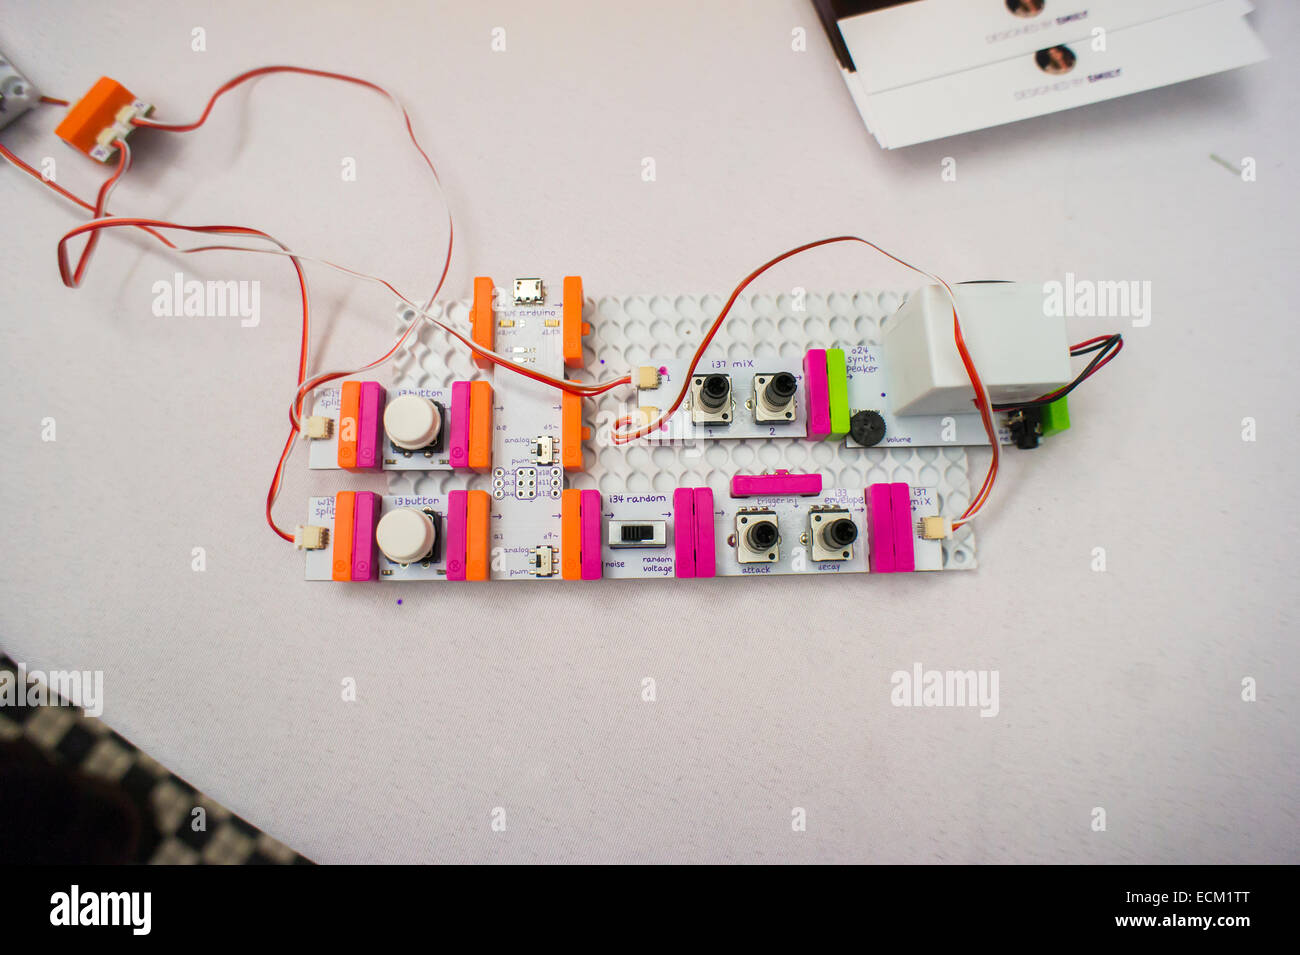 A LittleBits module at a RadioShack sponsored demonstration at an event in New York on Saturday, December 13, 2014. The retailer joined with LittleBits to promote the company's DIY kits which enable you to automate your household gadgets to connect to the 'Internet of Things' (IoT). Various modules connect together to turn your analog appliances into cloud connected smart appliances. RadioShack sells the devices hoping to reinvigorate itself as the go to place for DIY tech geeks. (© Richard B. Levine) Stock Photo